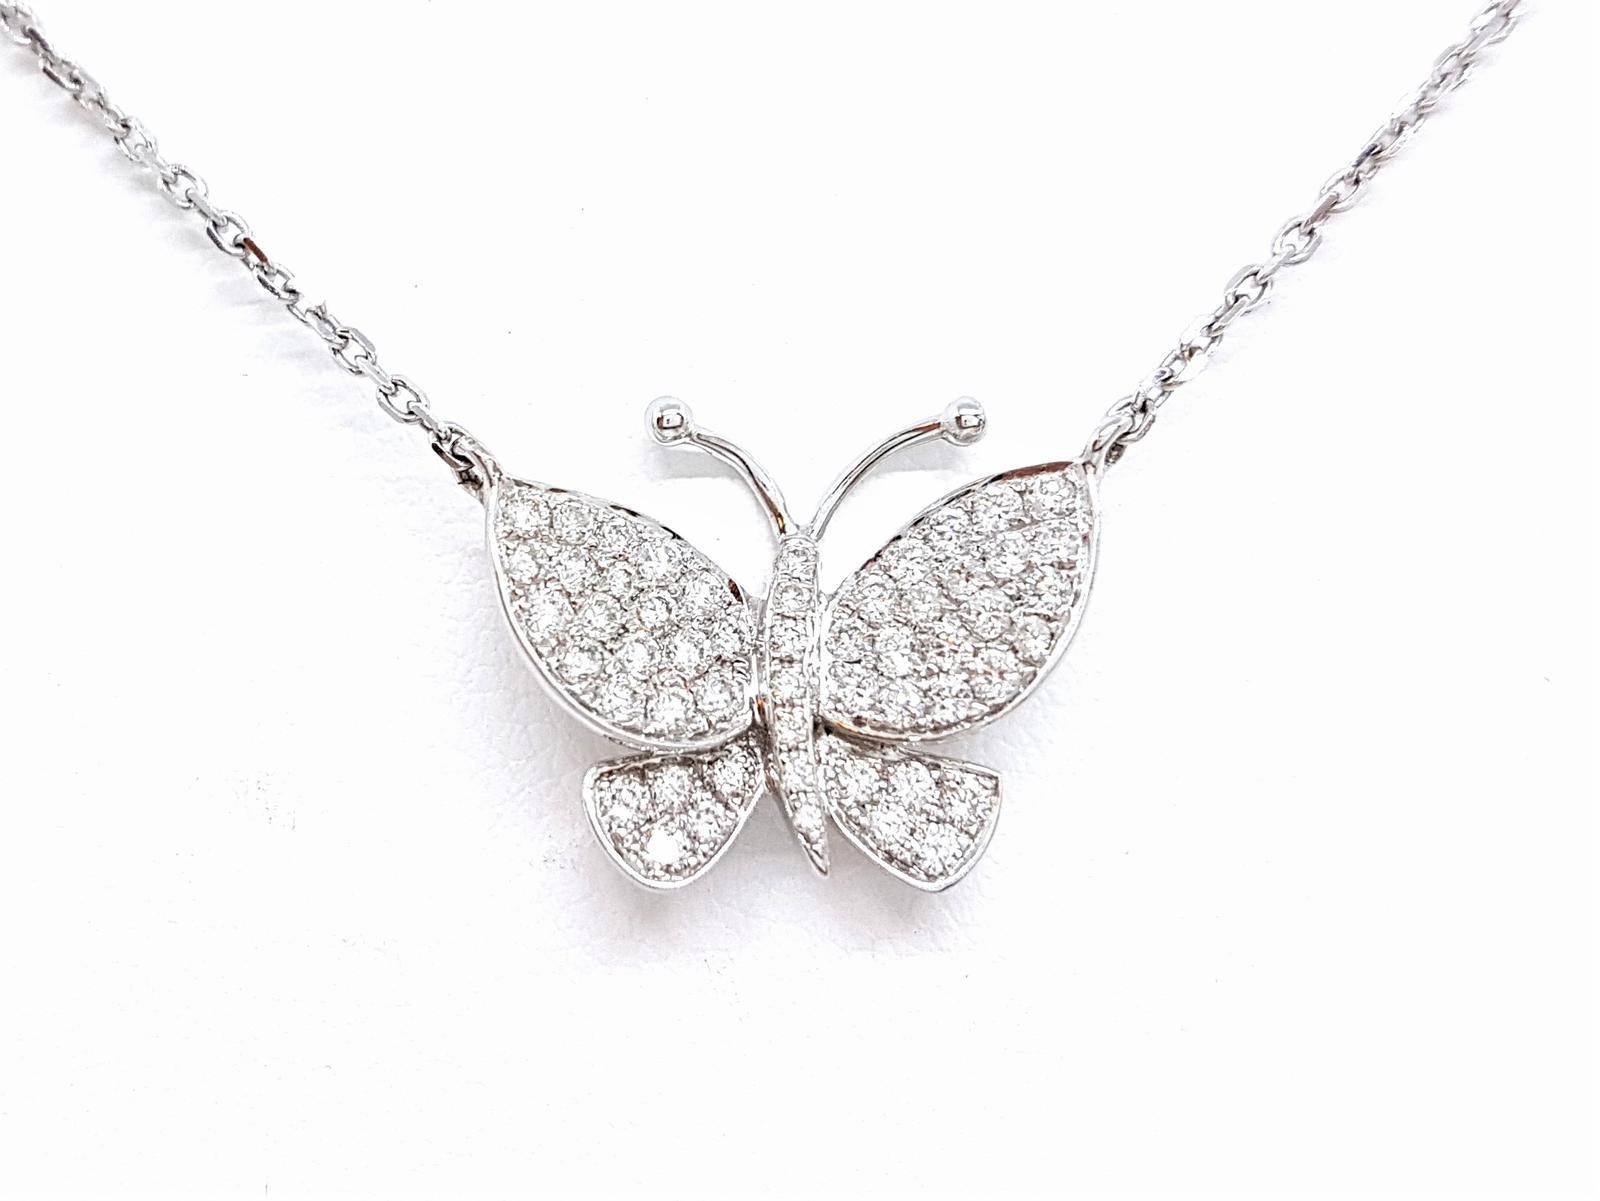 Gorgeous collar Vendôme house. white gold 750 mils (18 carats). pendant butterfly pad diaants brilliant cut 0.60 carat total chain length: 42 cm. butterfly dimensions: 1.75 cm x 1. 4 cm. total weight: 3.62 g. punch eagle head. new. new price: 2750 €
